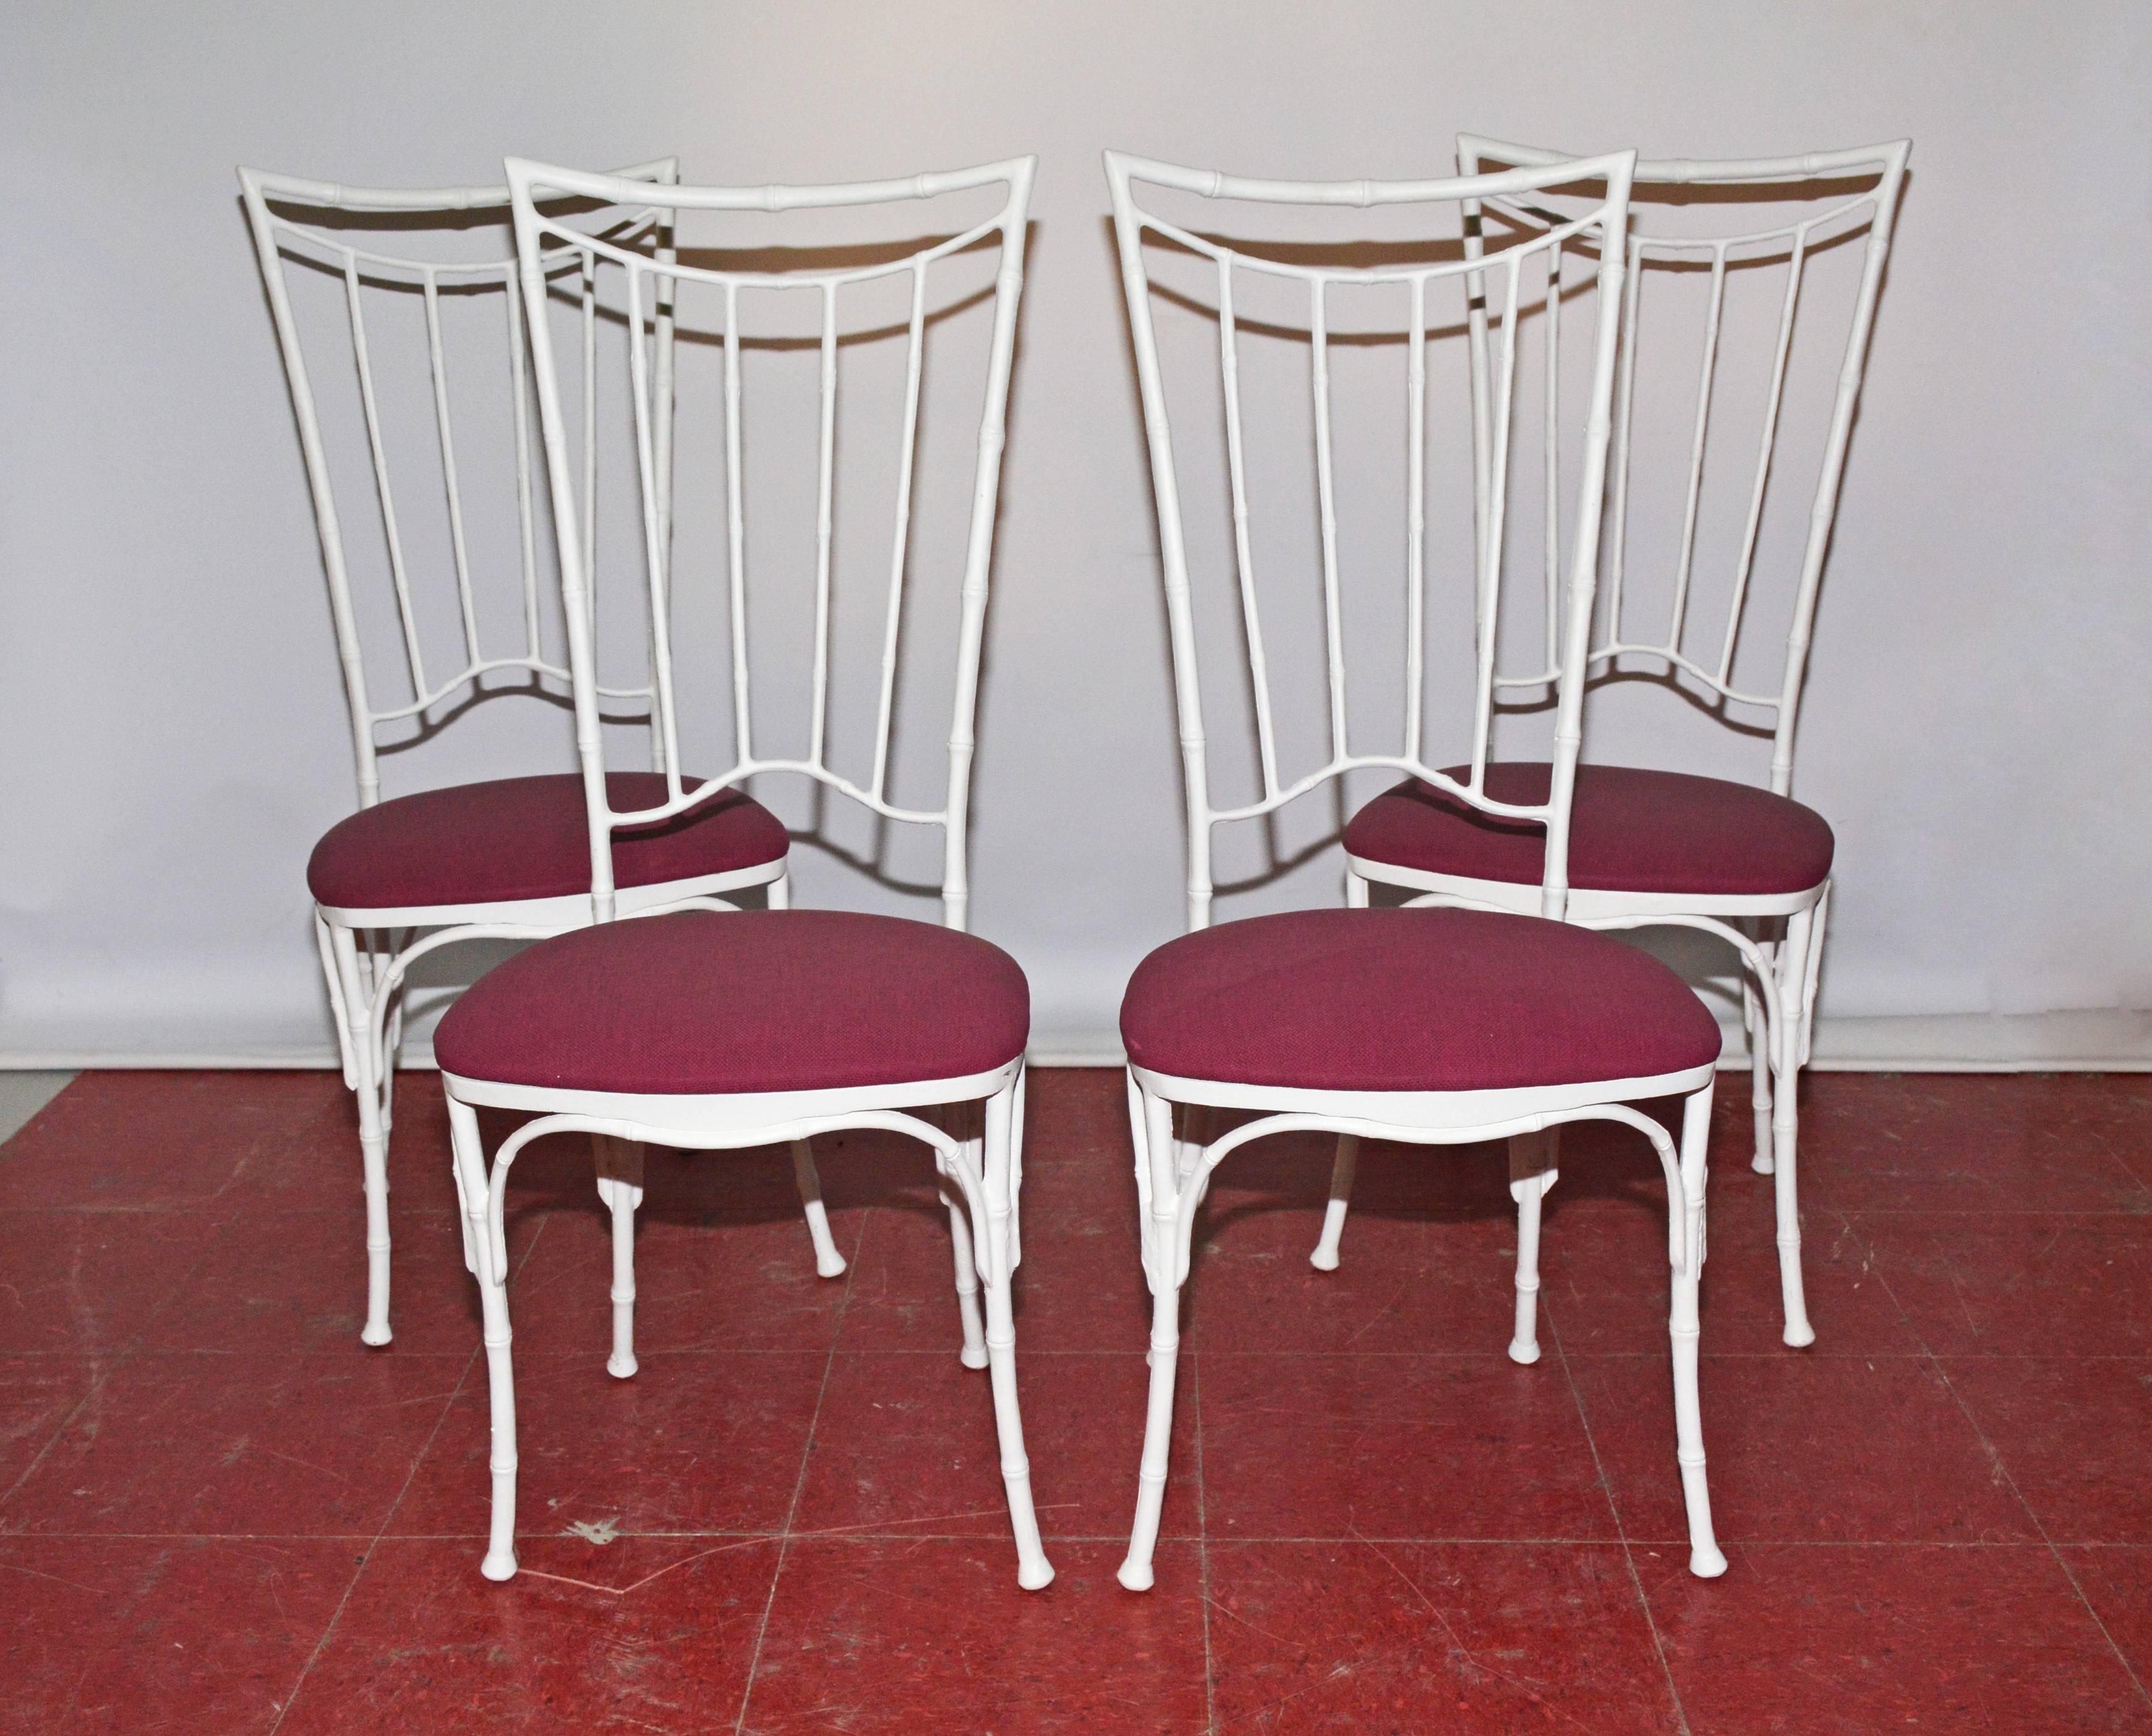 The chinoiserie style faux bamboo dining chairs are made of wrought iron painted white and have seats upholstered in purple outdoor fabric. The set is suitable for indoor or outdoor use. Seats can be easily recovered with a fabric of your choice.